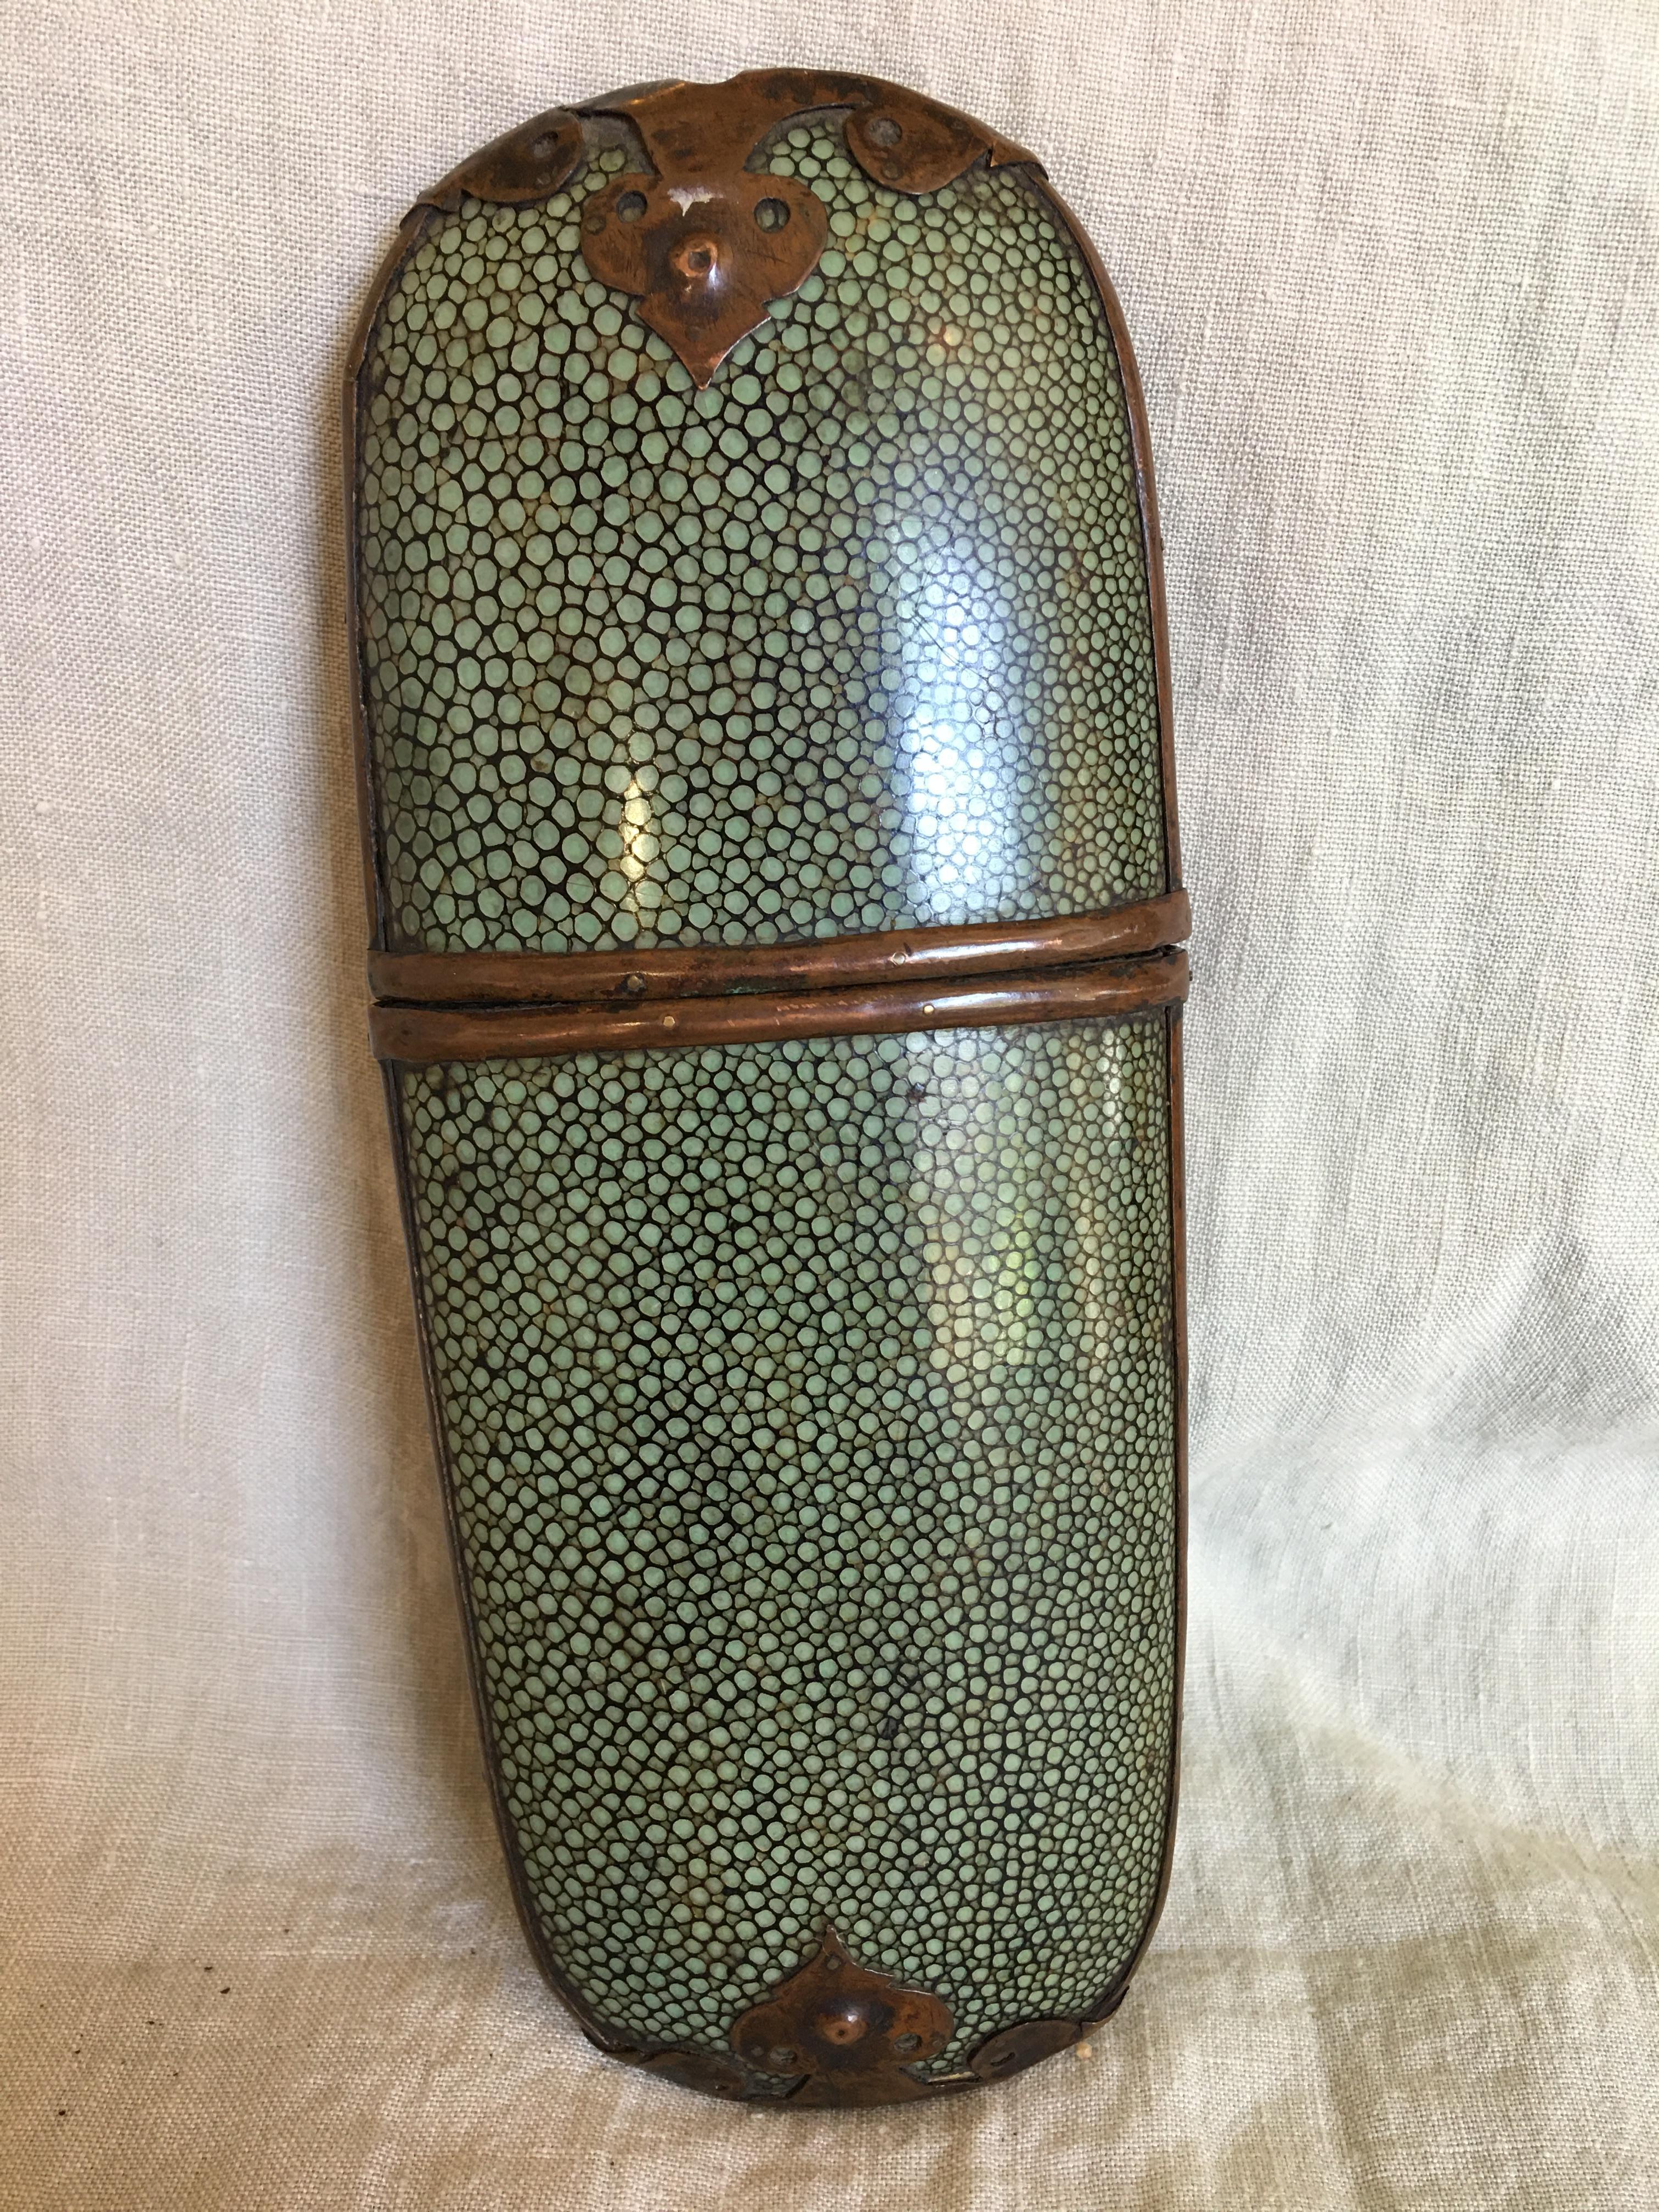 Chinese green shagreen brass mounted eyeglass case, early 20th century.